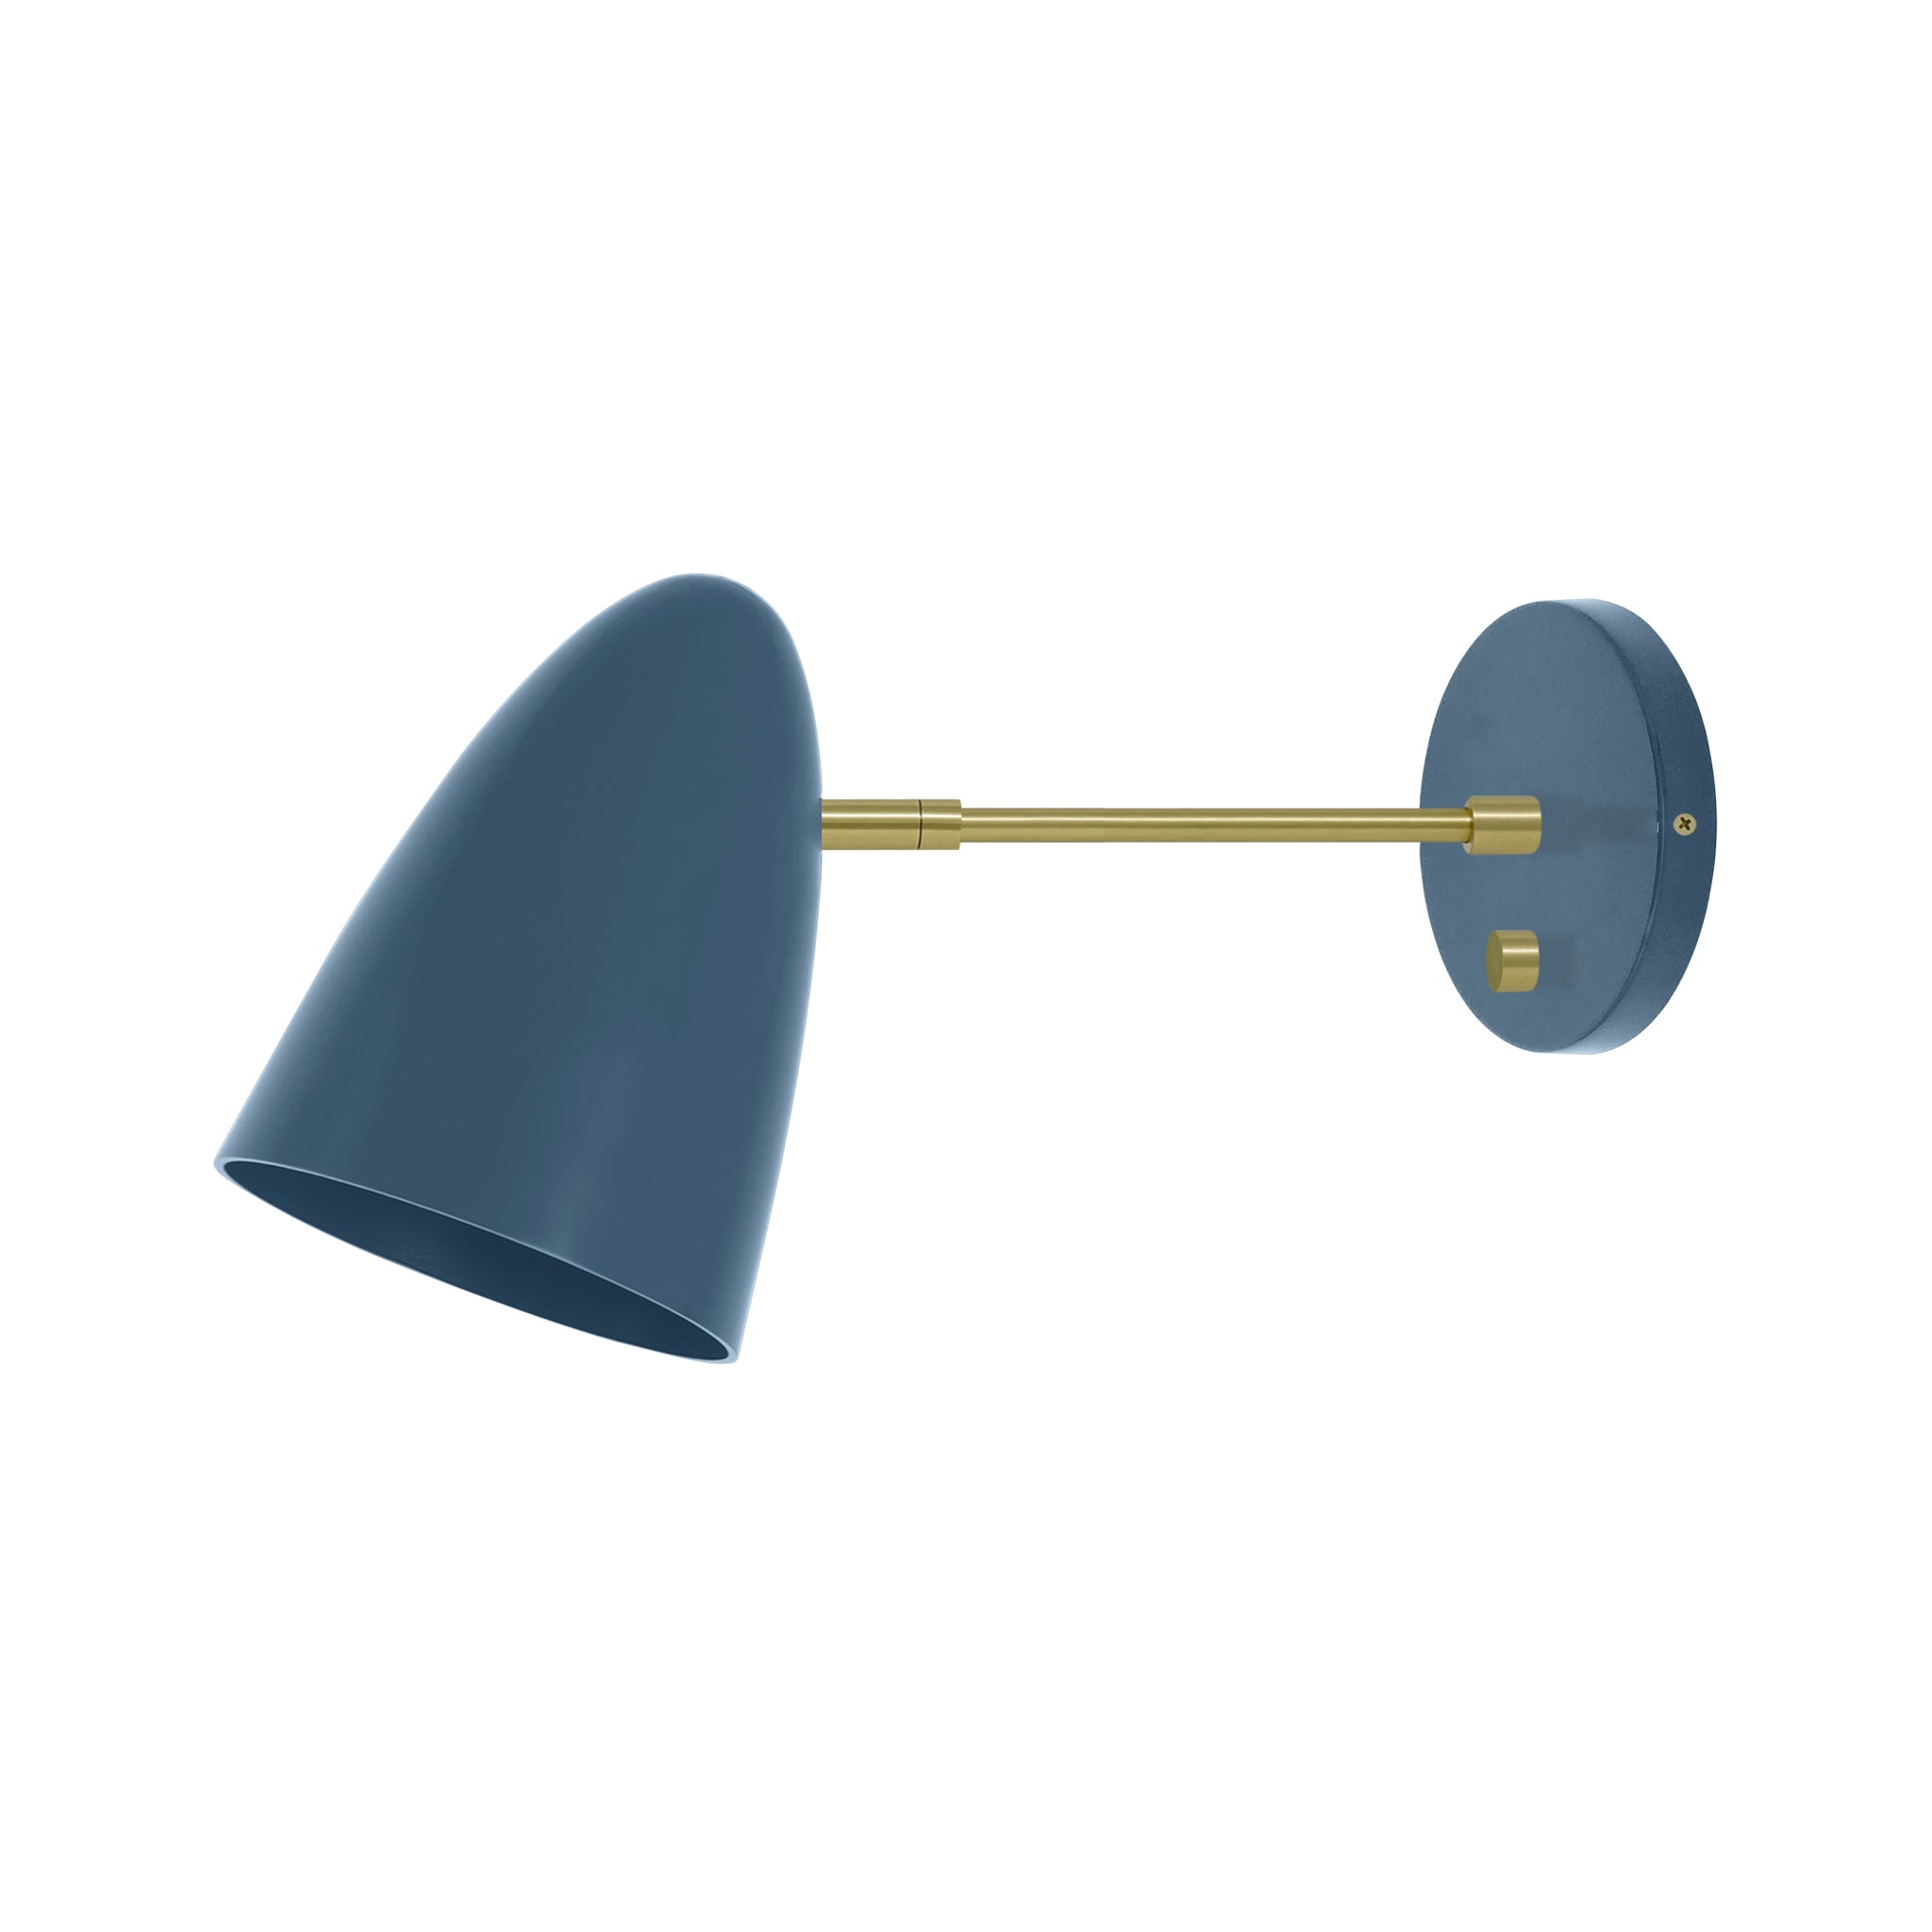 Brass and slate blue color Boom sconce 6" arm Dutton Brown lighting